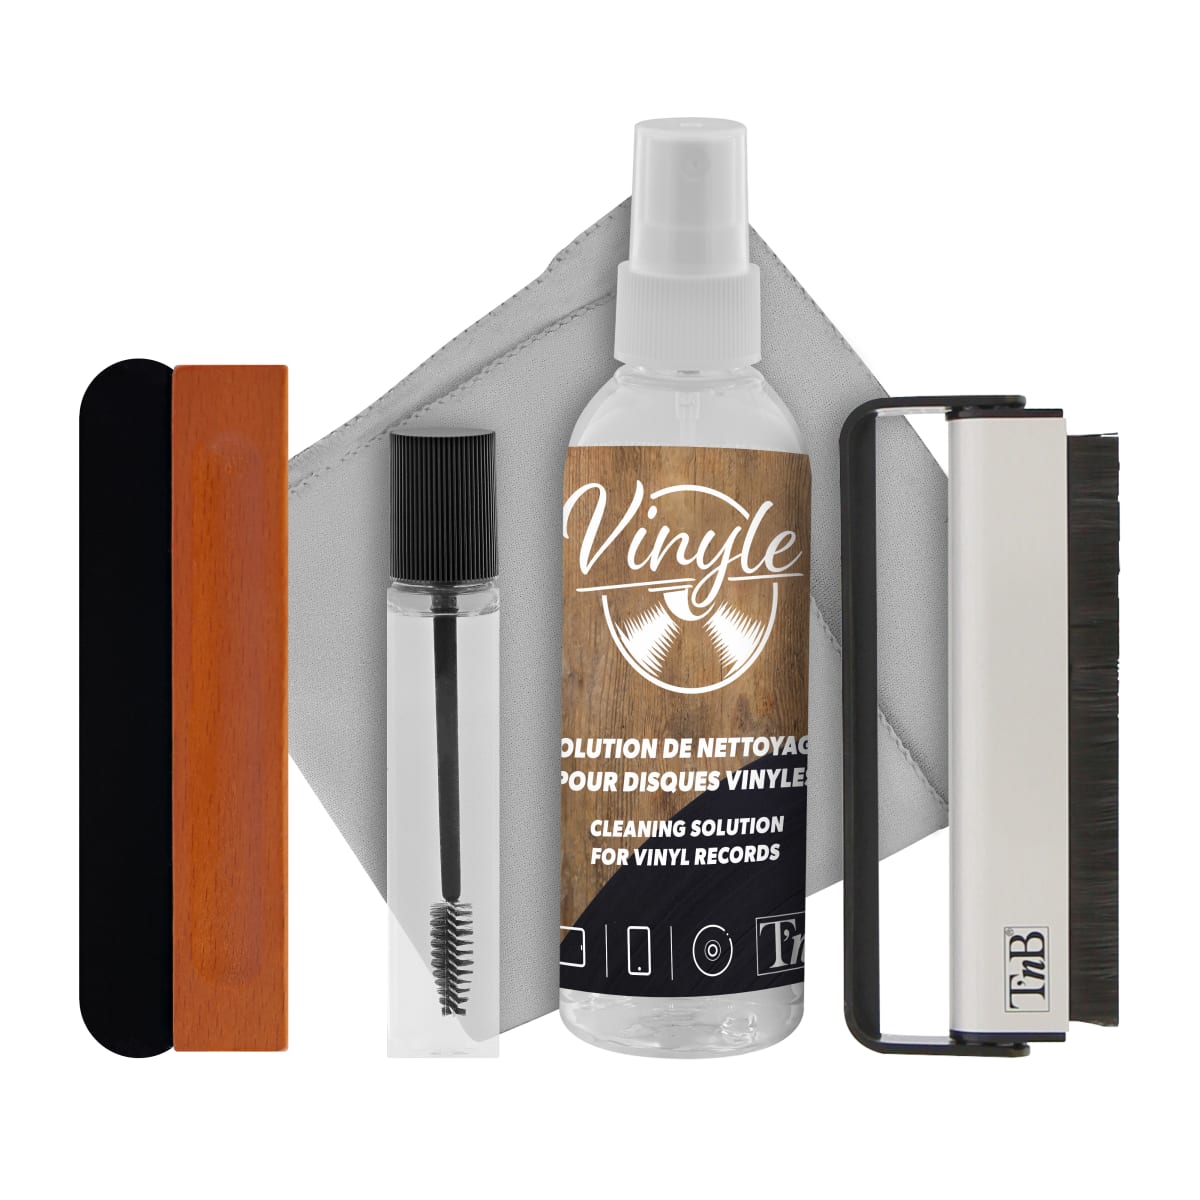 5-in-1 cleaning kit for records and turntables